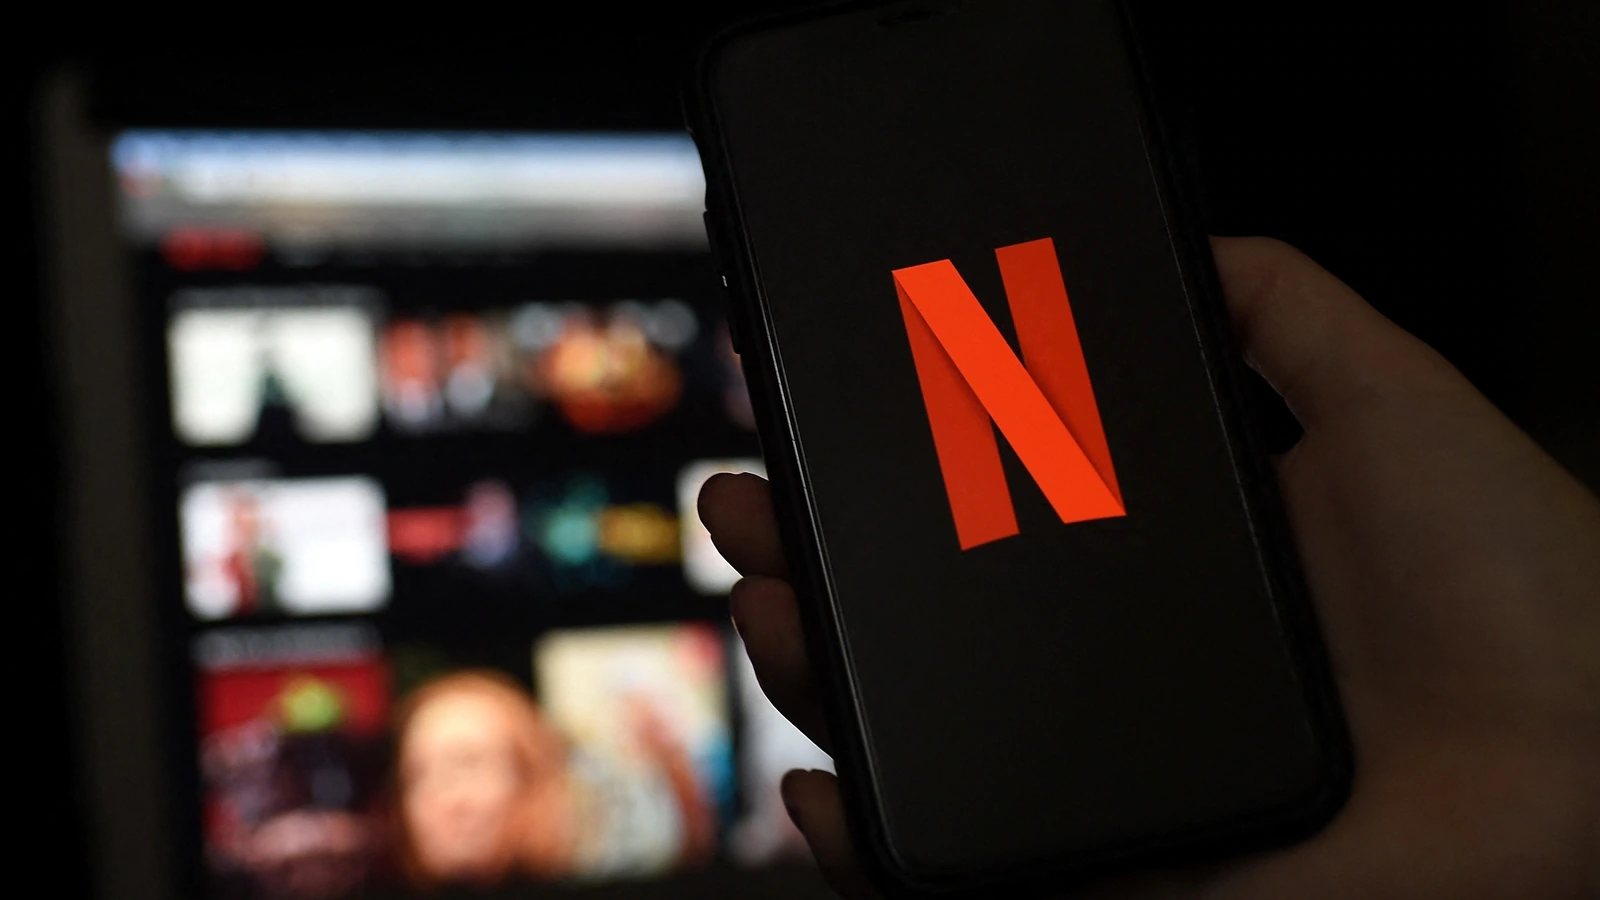 Netflix Increases Monthly Subscription Price In Us And Canada Check